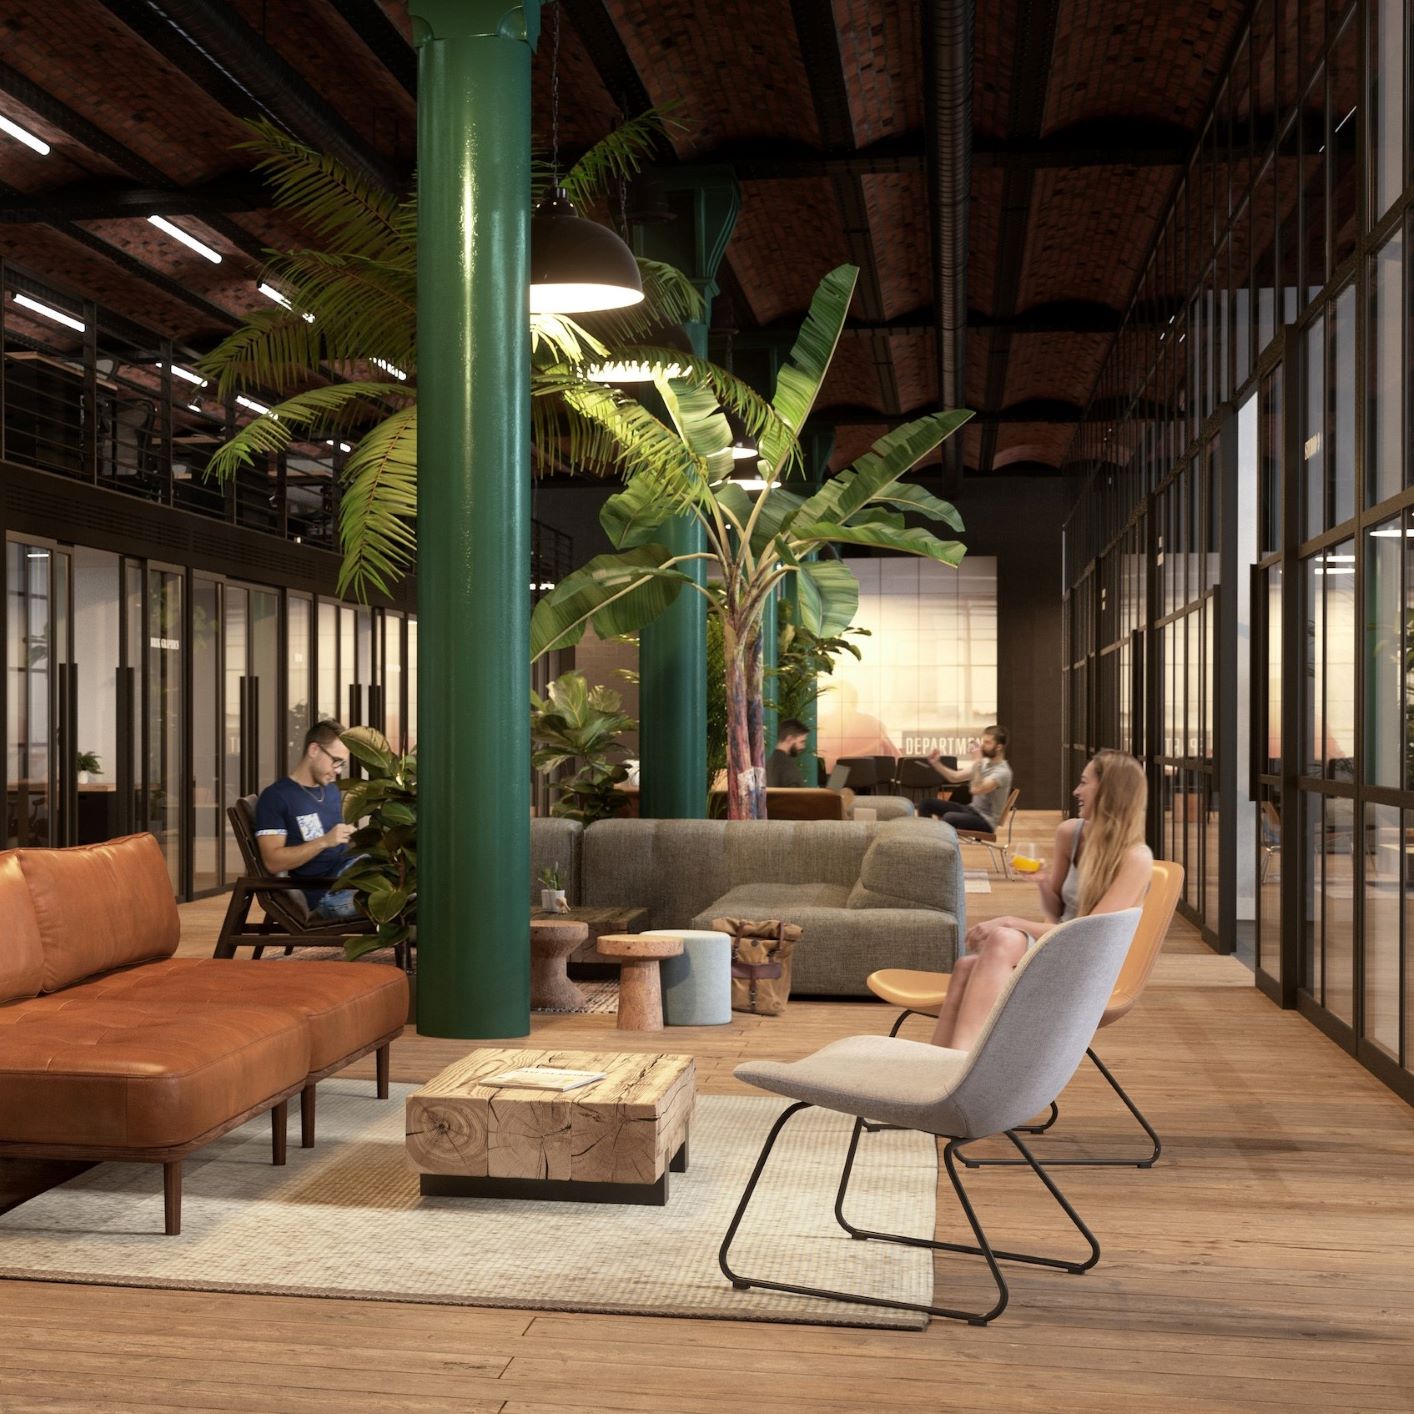 1800s warehouse opens its doors for coworking